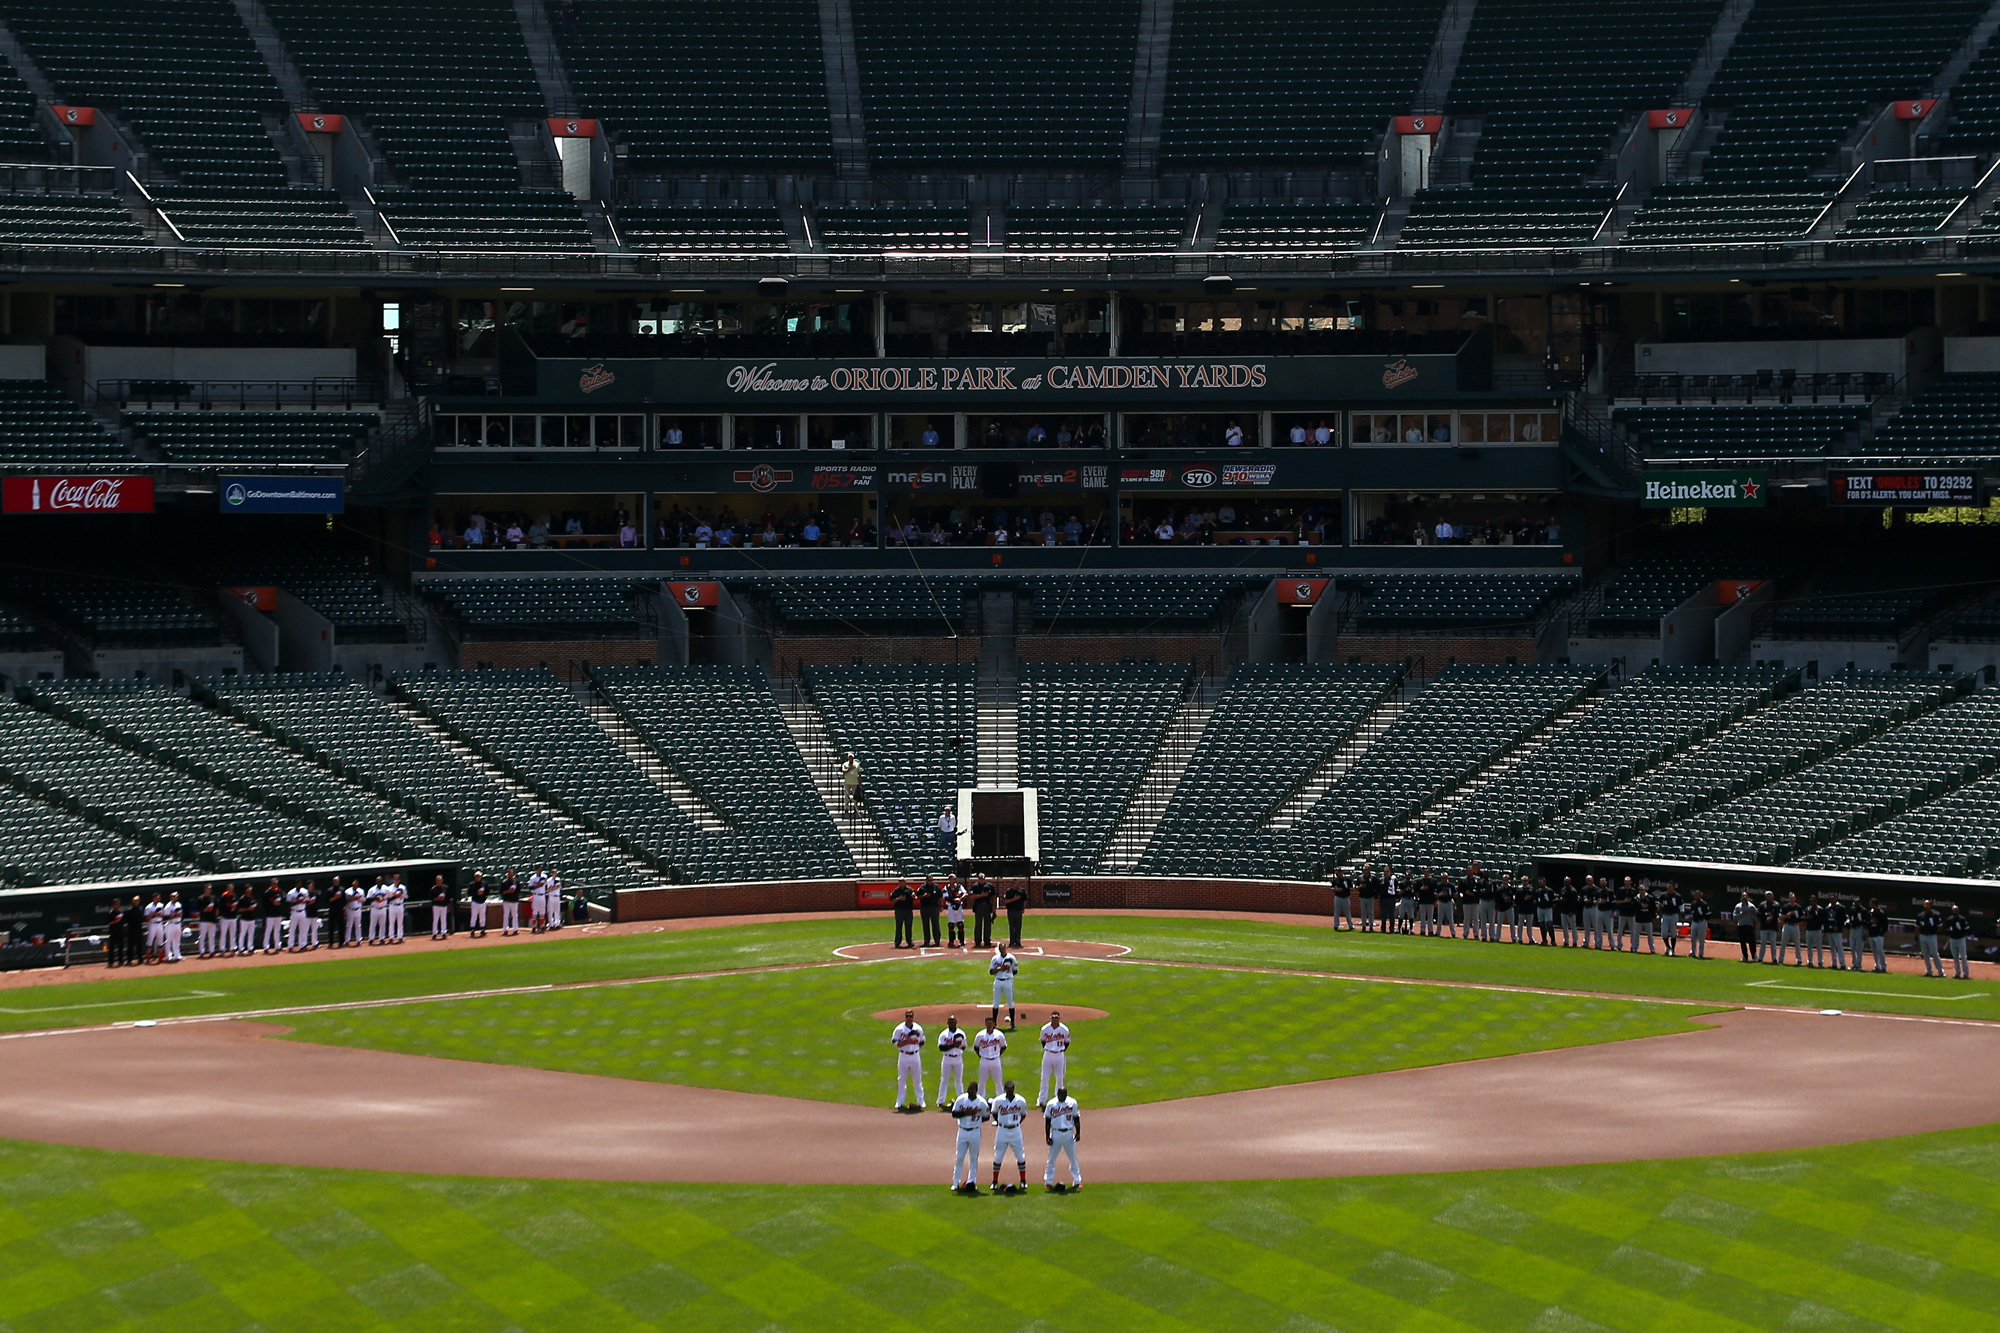  The Baltimore Orioles and Chicago White Sox stand for the nation anthem at an empty Oriole Park at Camden Yards on April 29, 2015 in Baltimore, Maryland. 